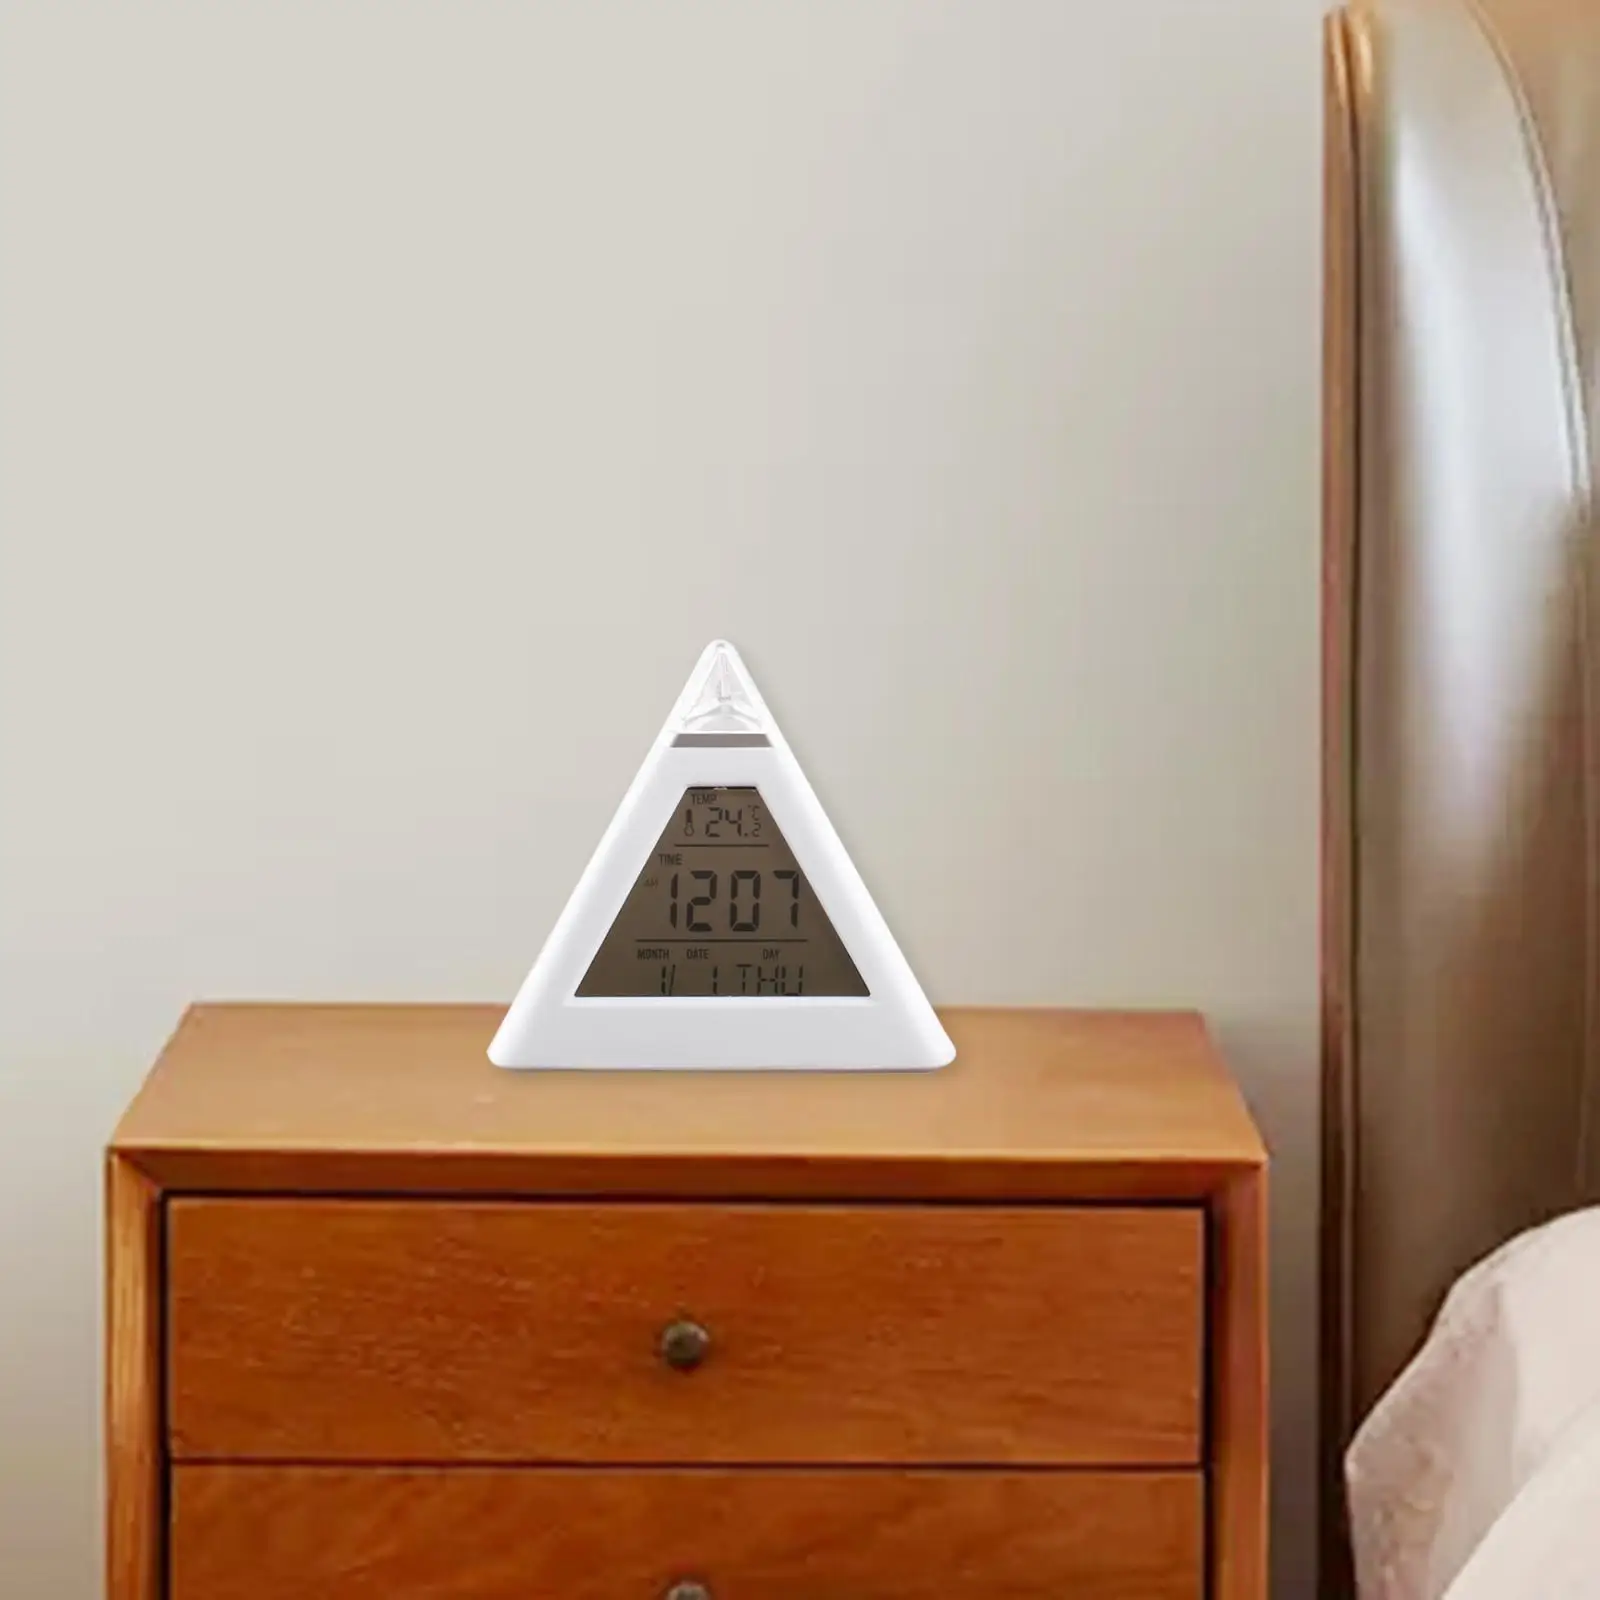 LED Triangle Alarm Clock Decor Changing Color for Xmas Present